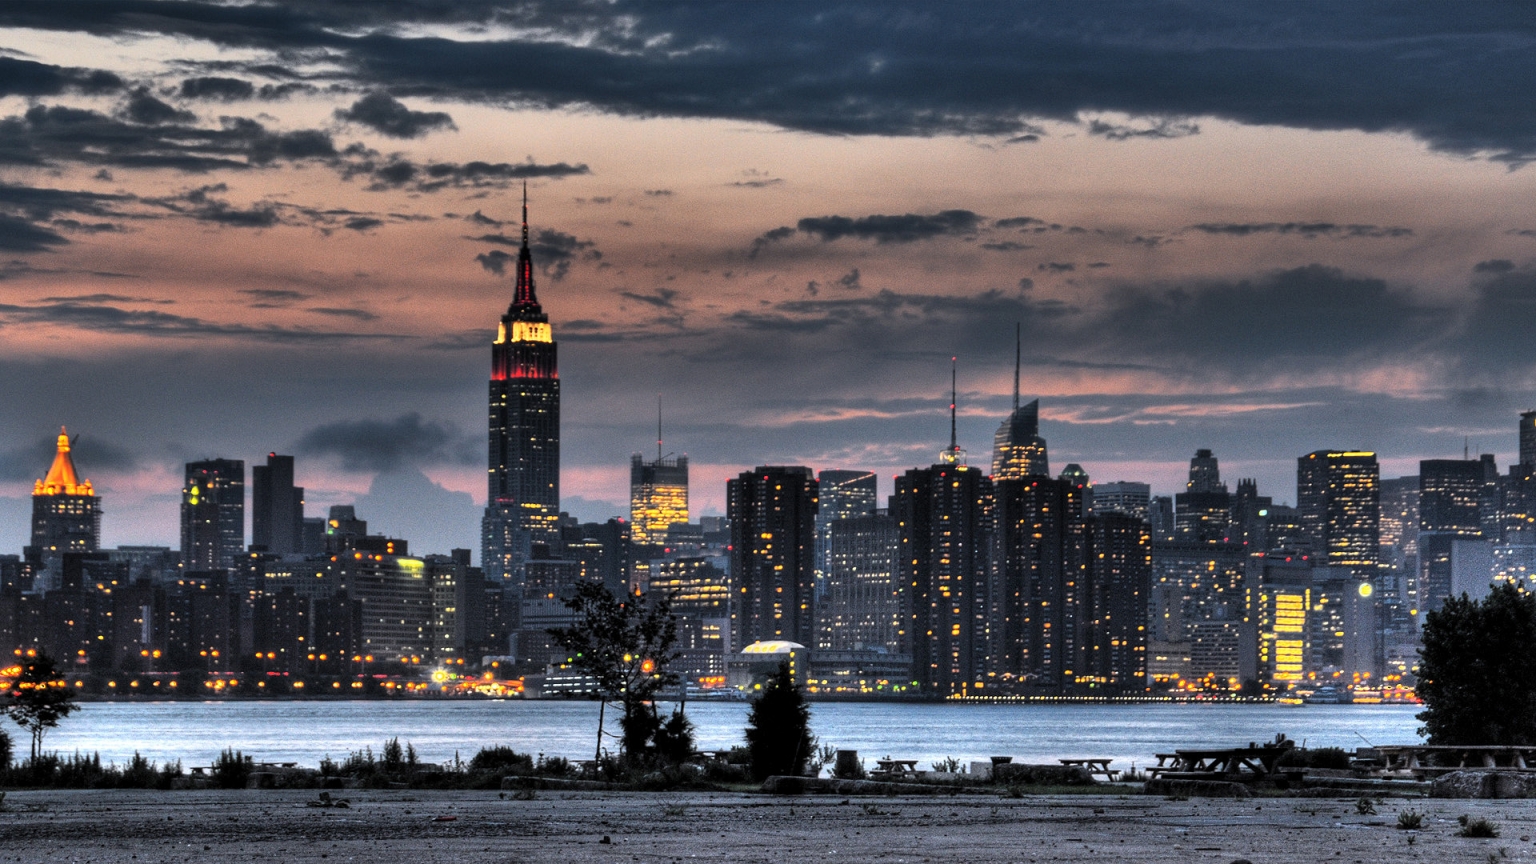 Background of Empire State Building for 1536 x 864 HDTV resolution